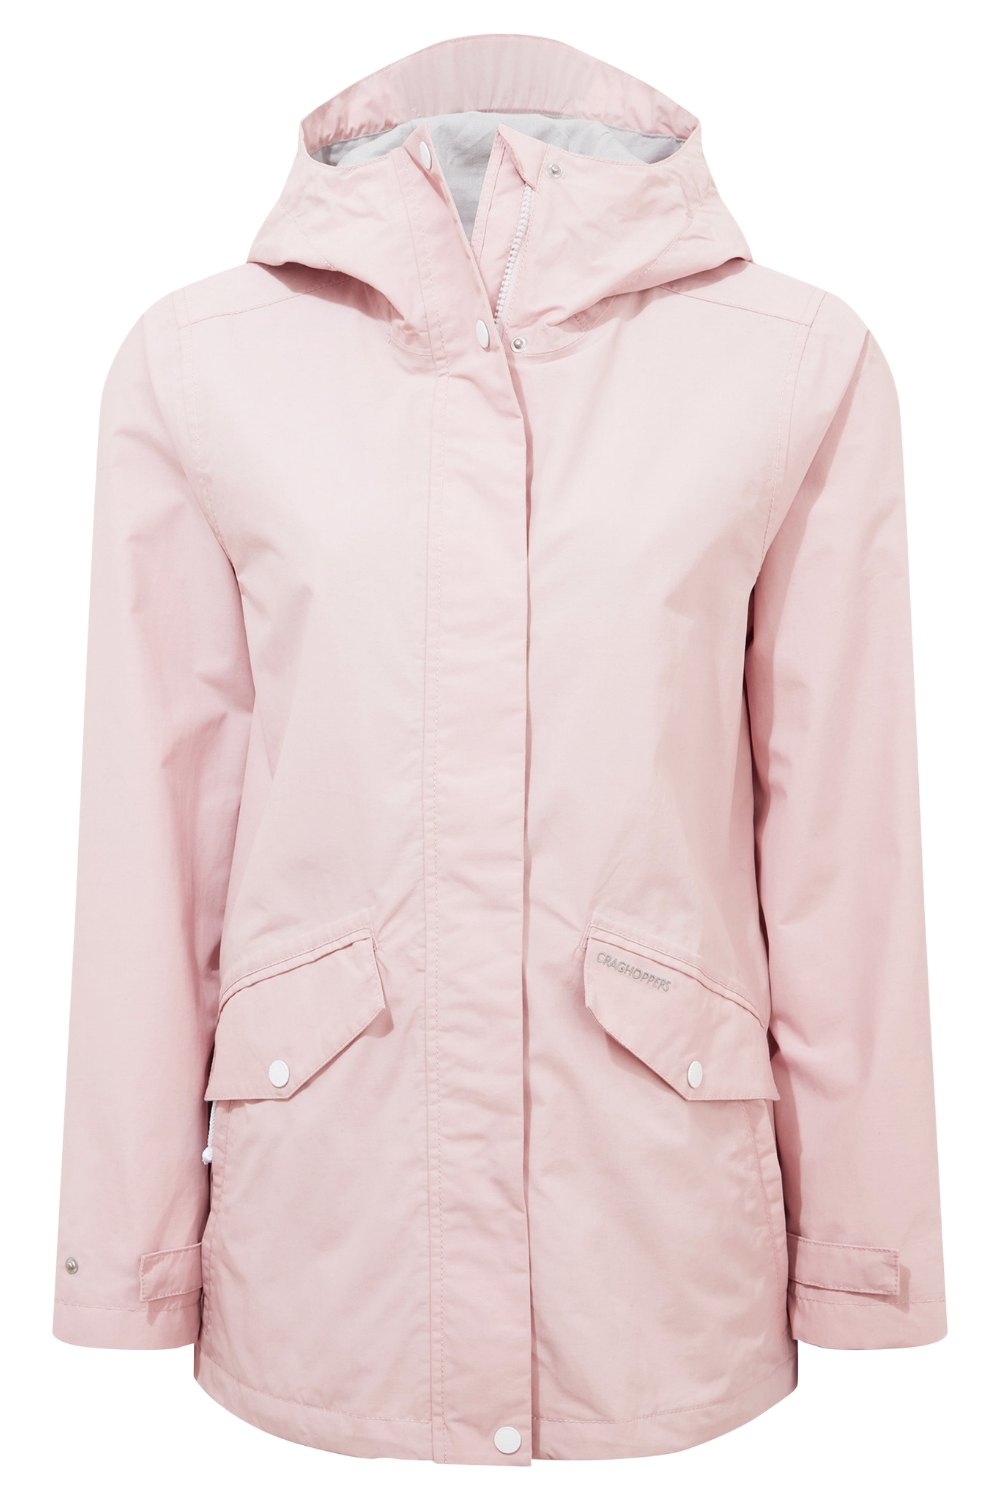 Craghoppers Otina Jacket in Pink Clay